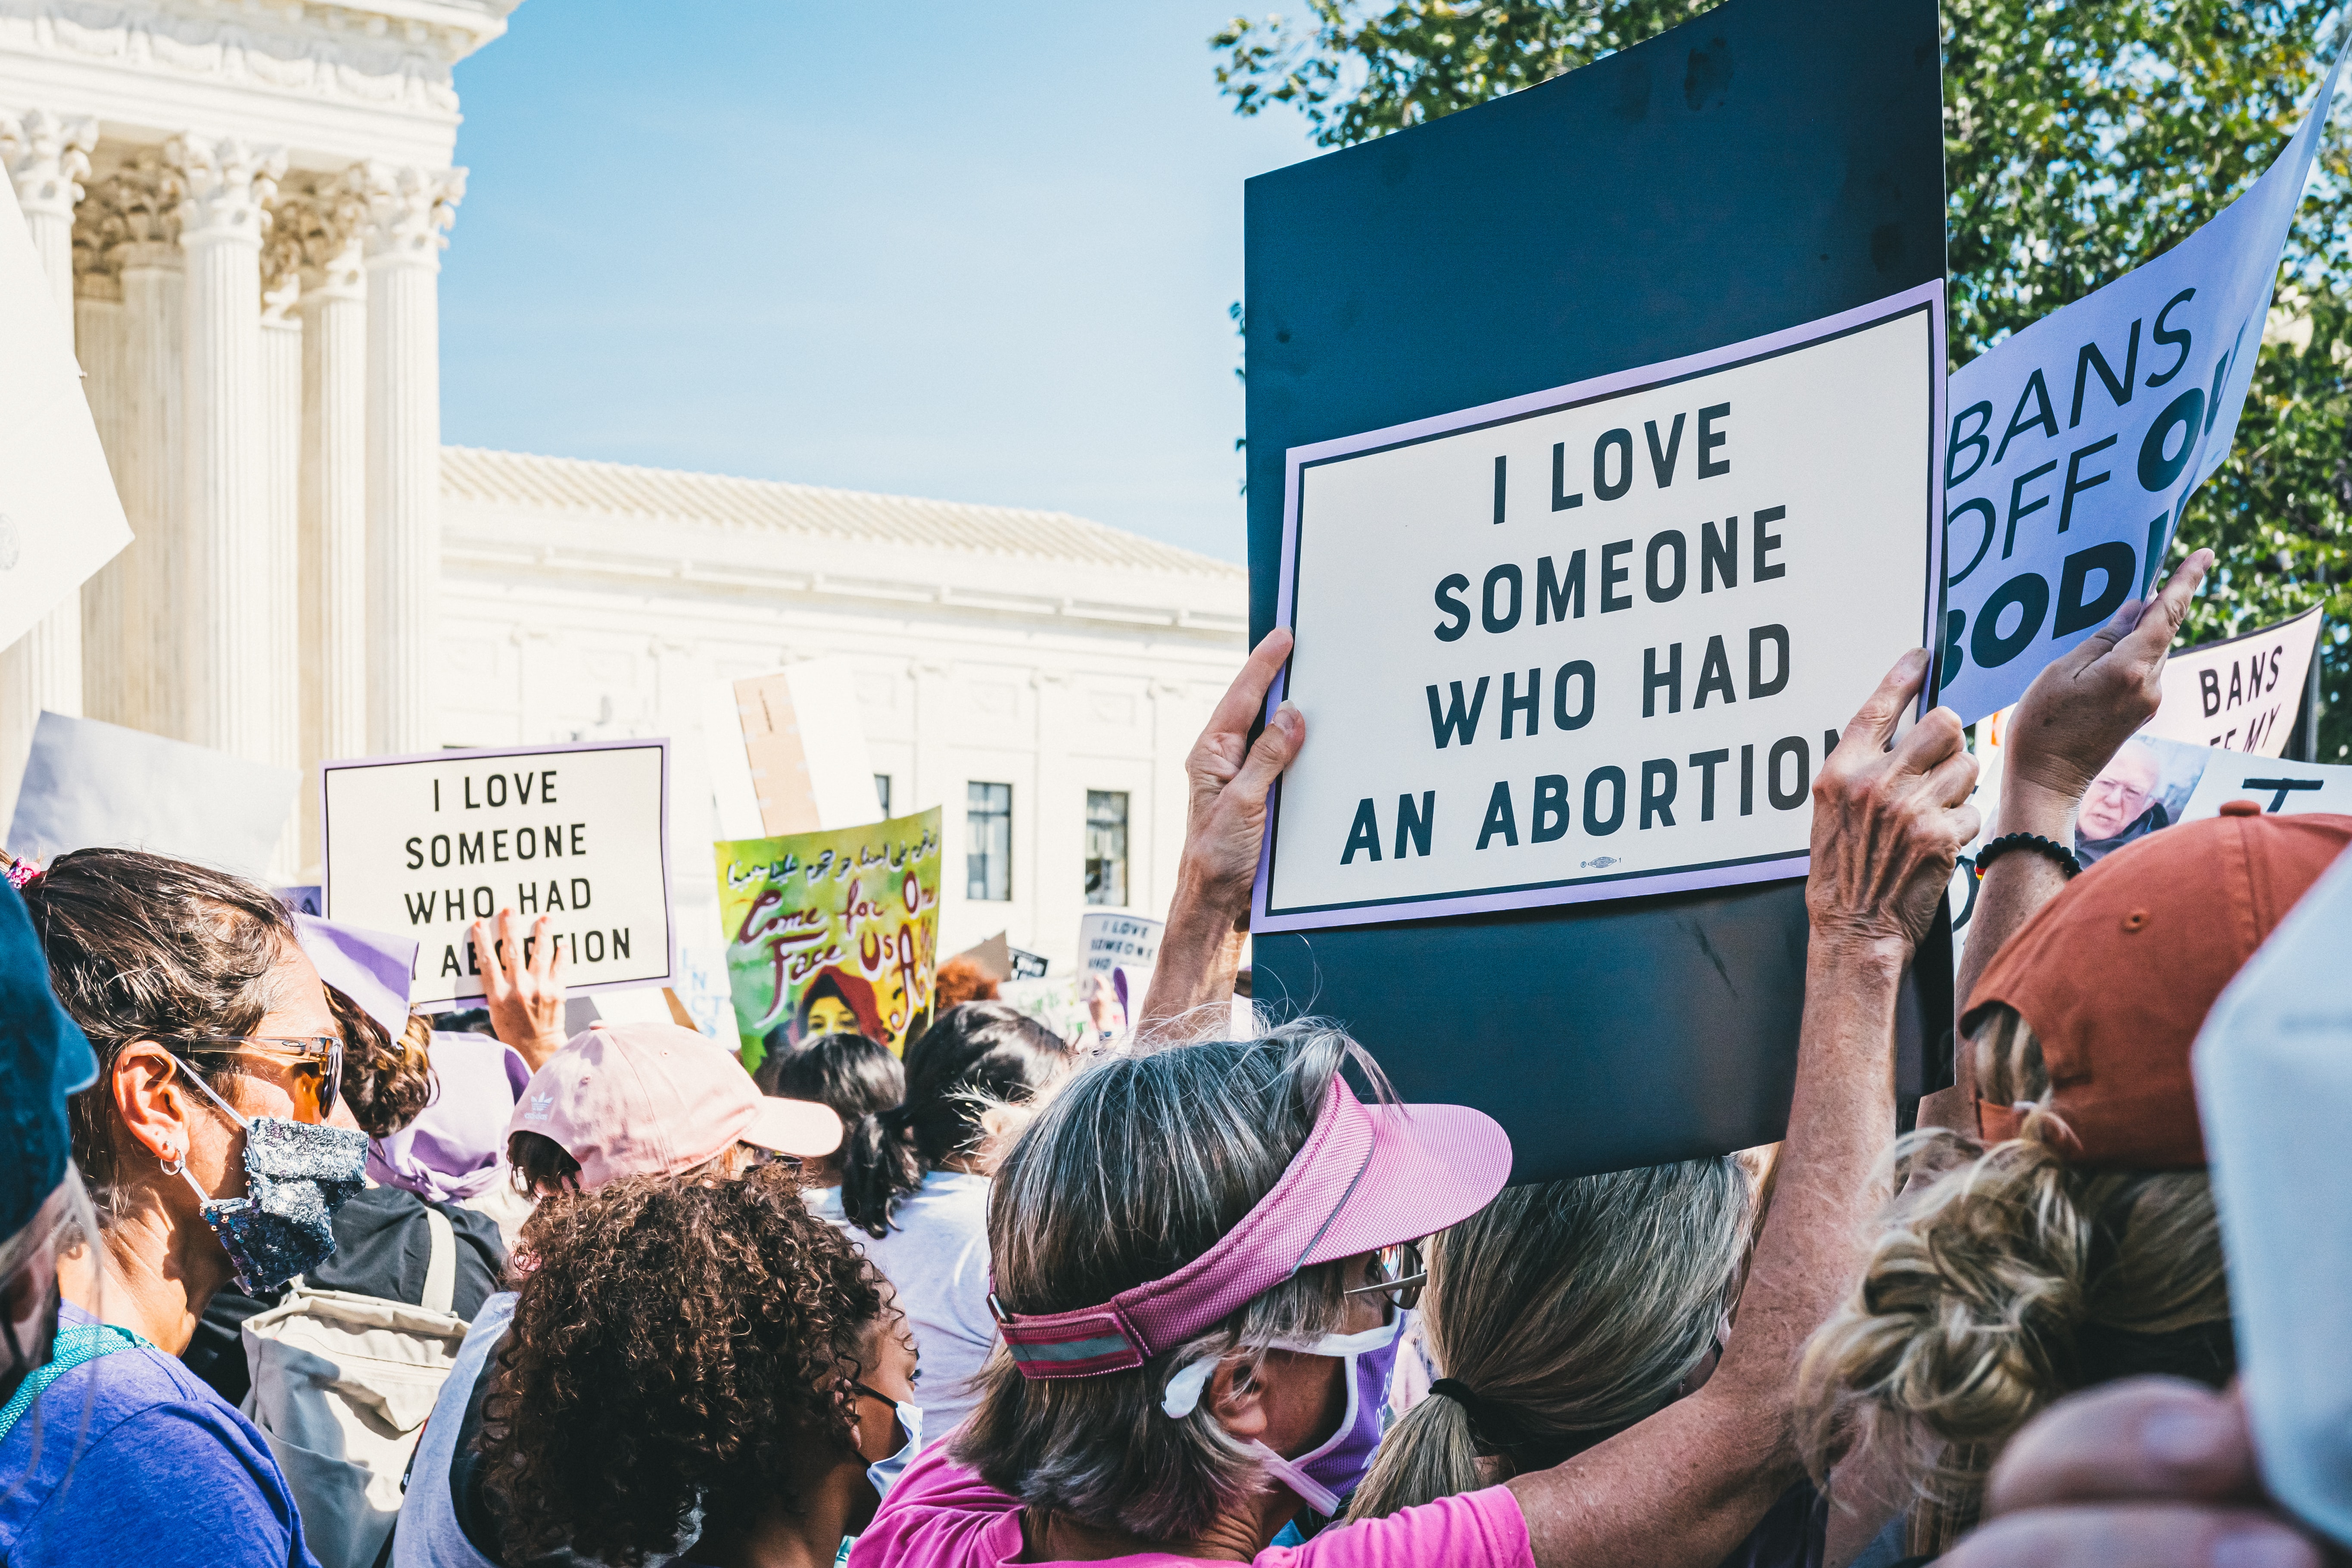 Protest sign reads "I love someone who had an abortion"